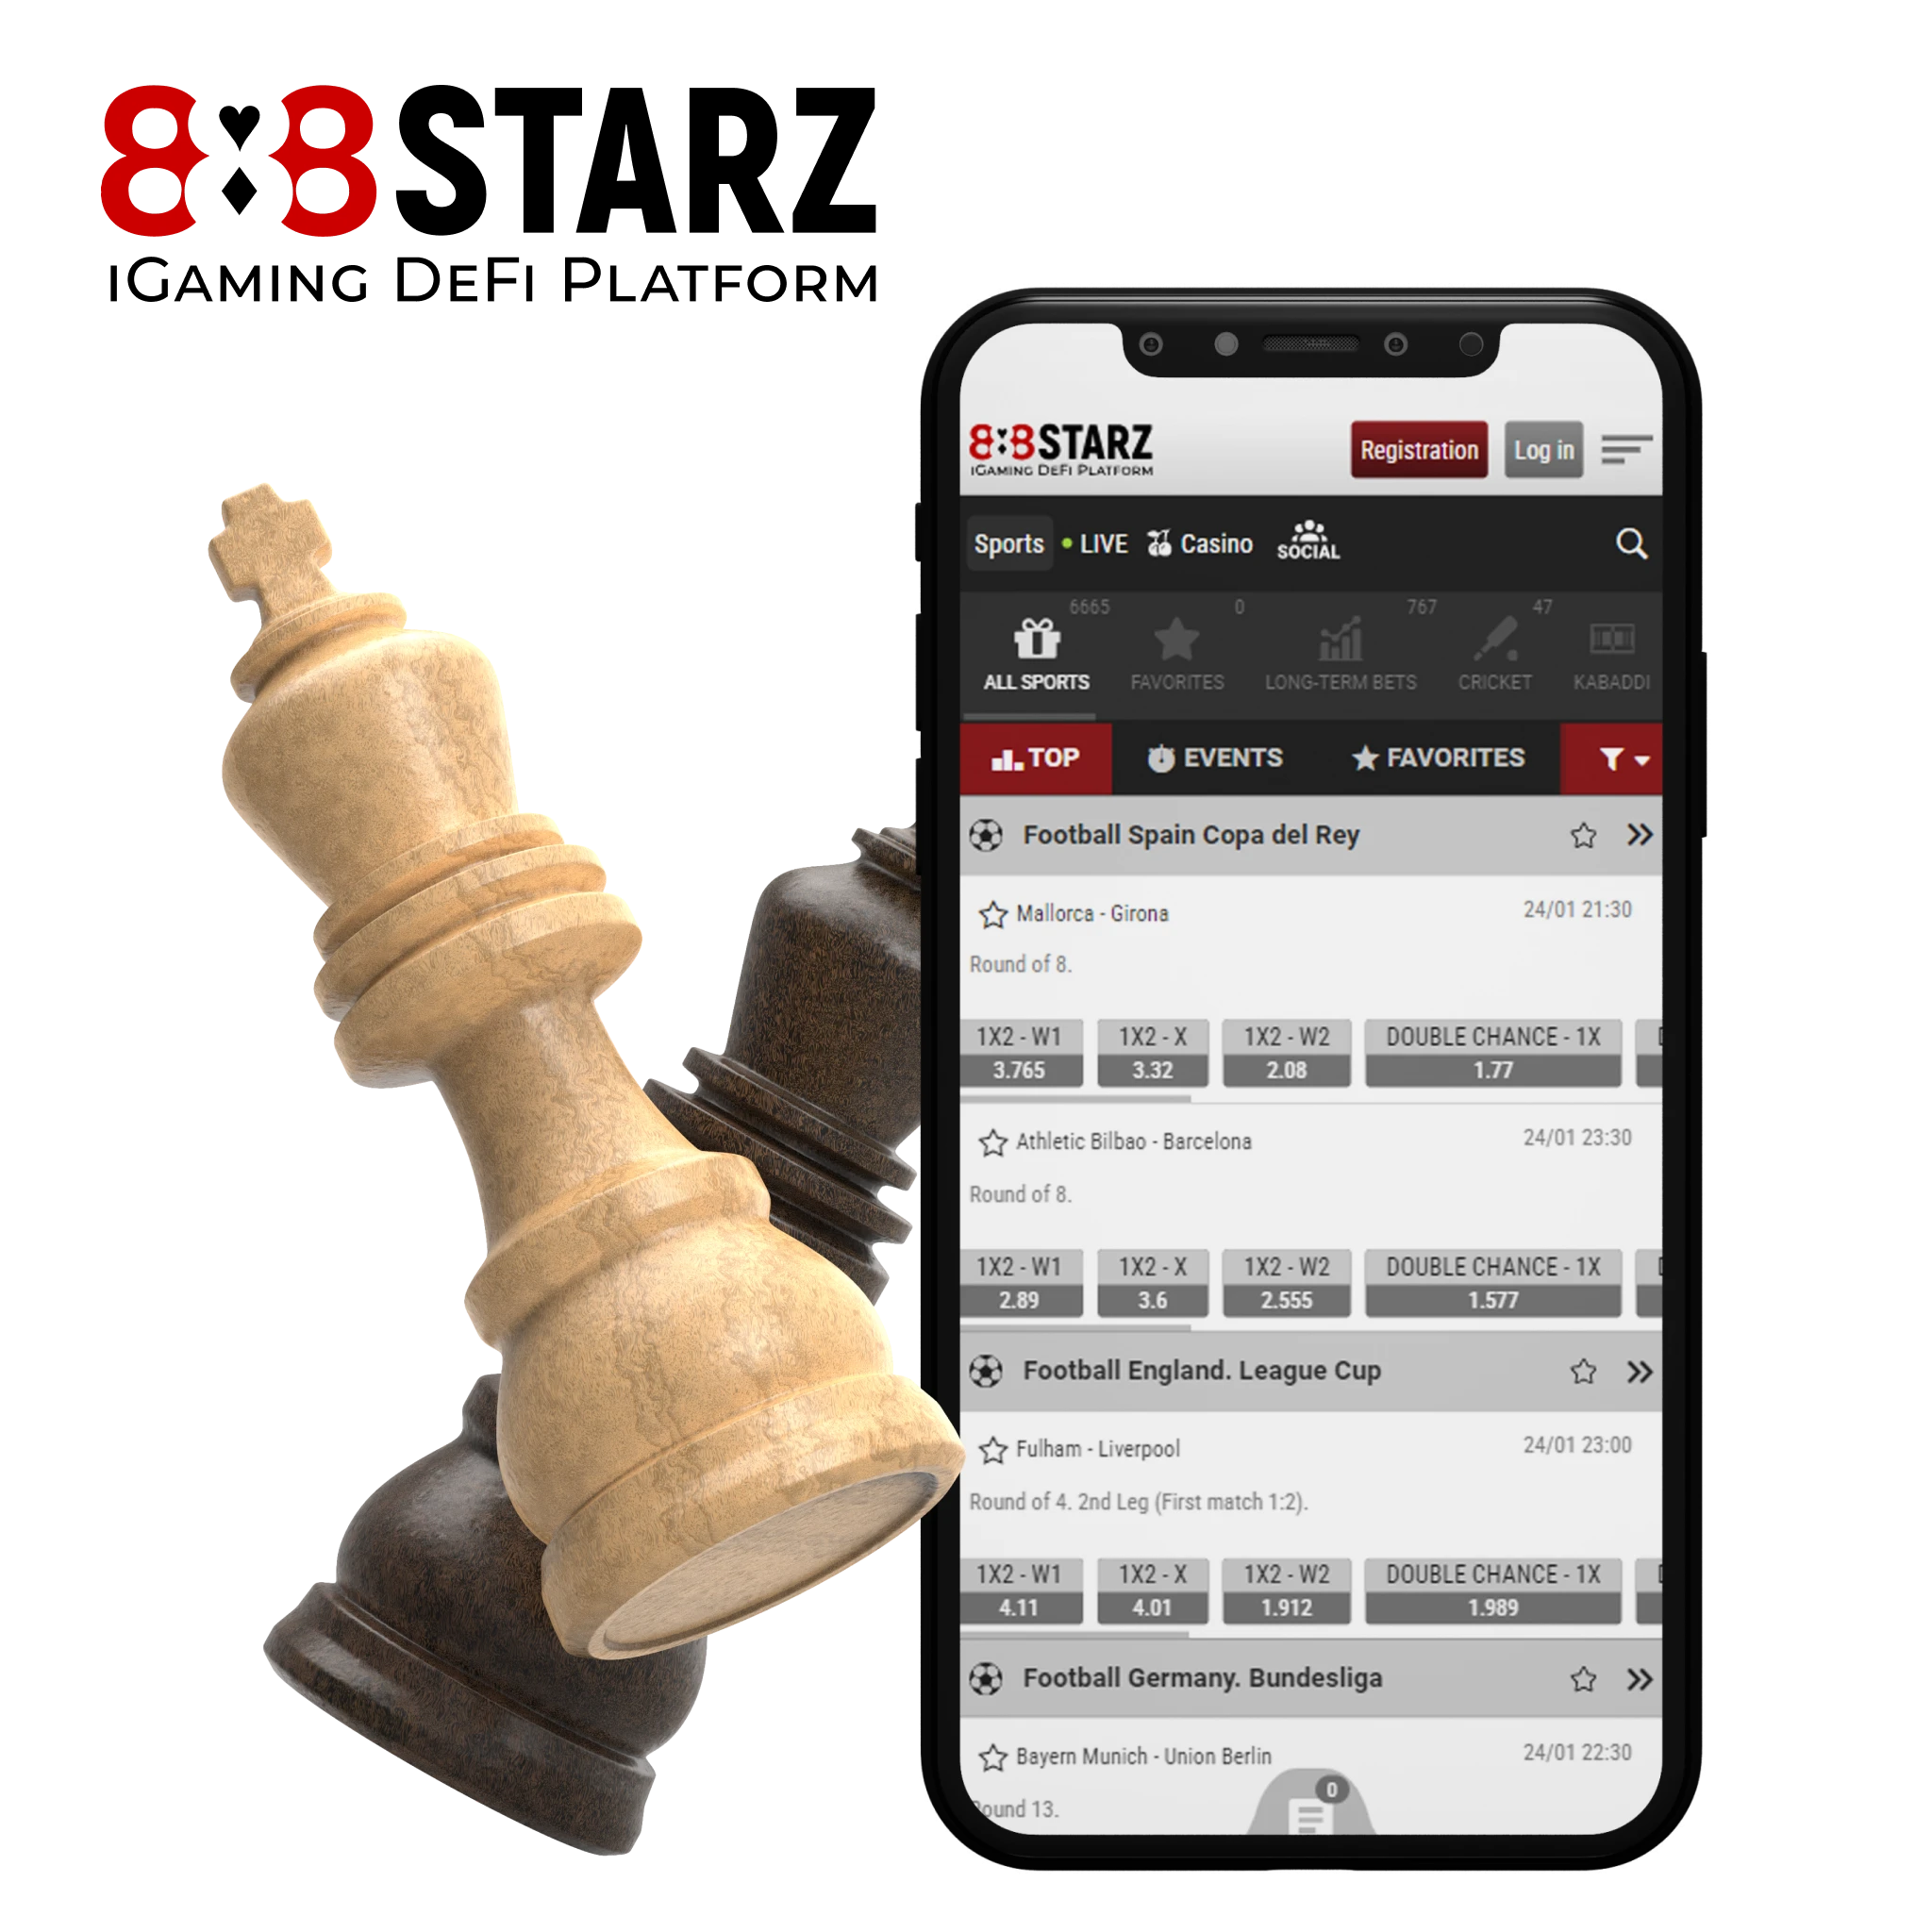 Place bets on chess games in 888starz app.